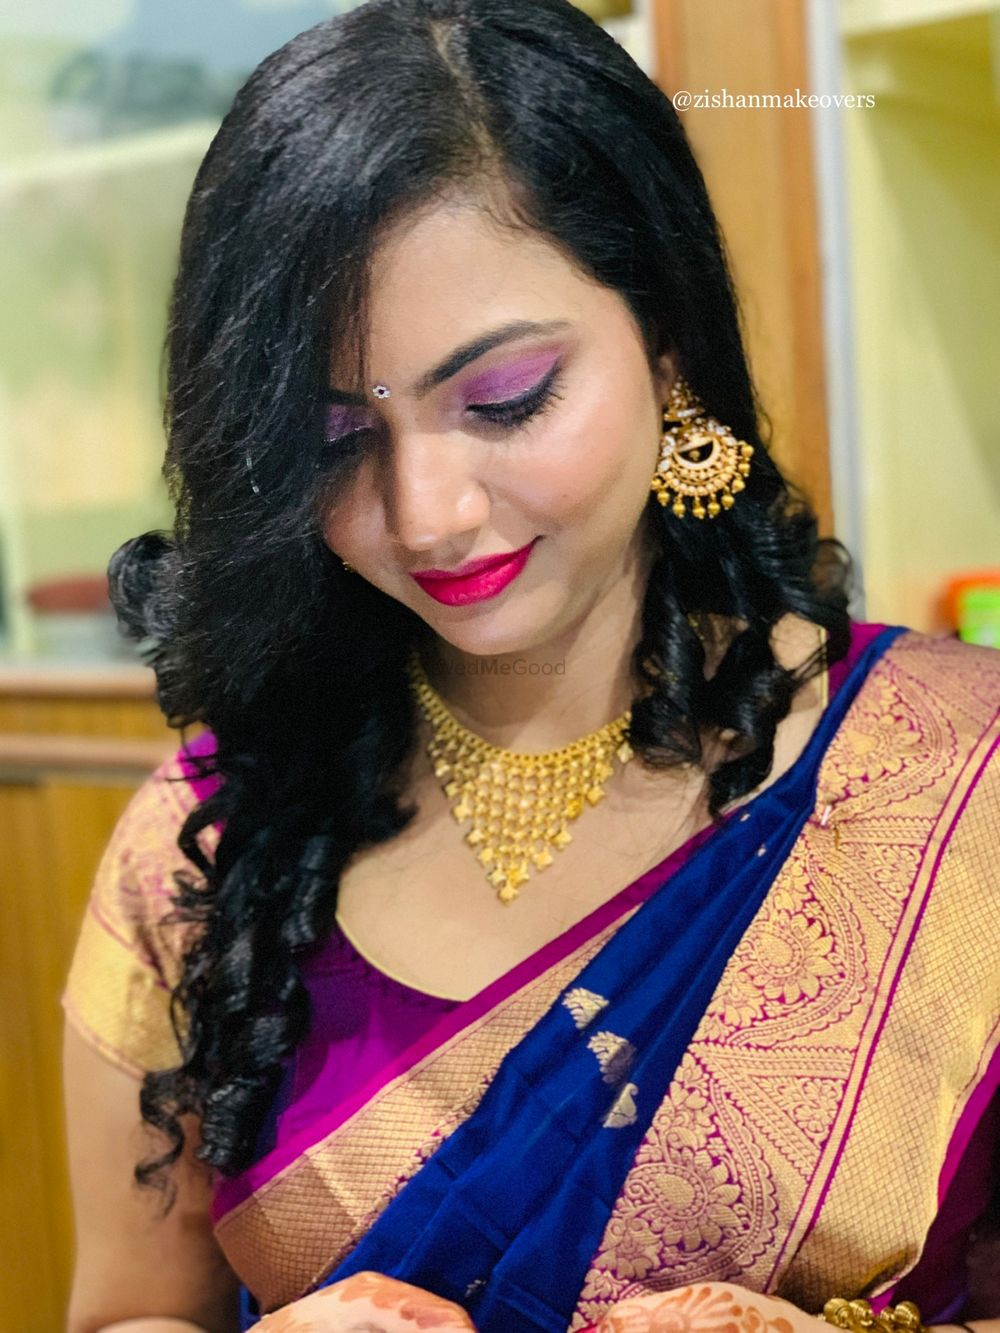 Photo From Orissa Client Diaries  - By Zishan Makeovers